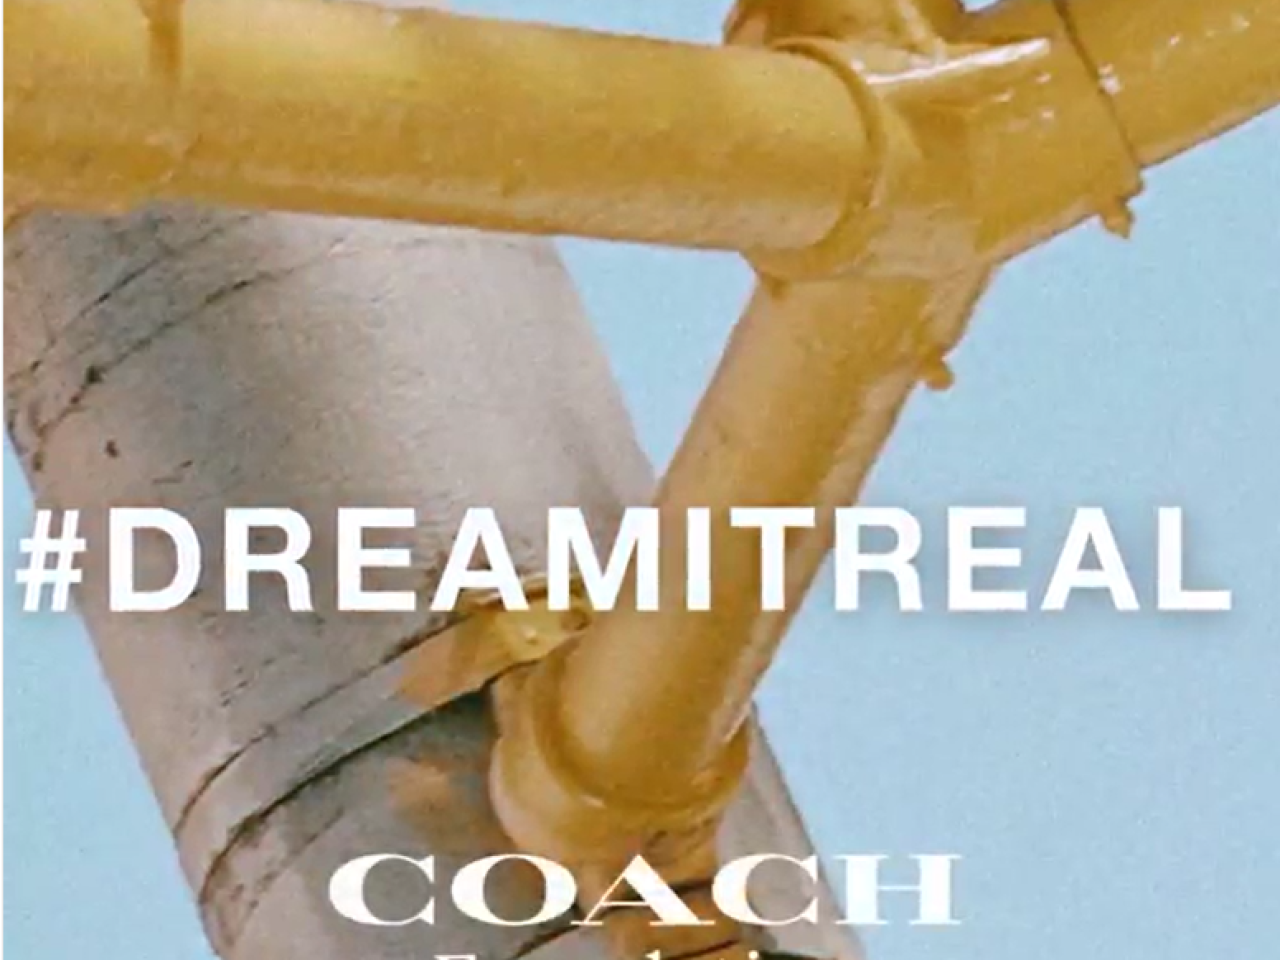 "#DREMITREAL Coach Foundation" gold painted pipes on a light blue background behind the words.